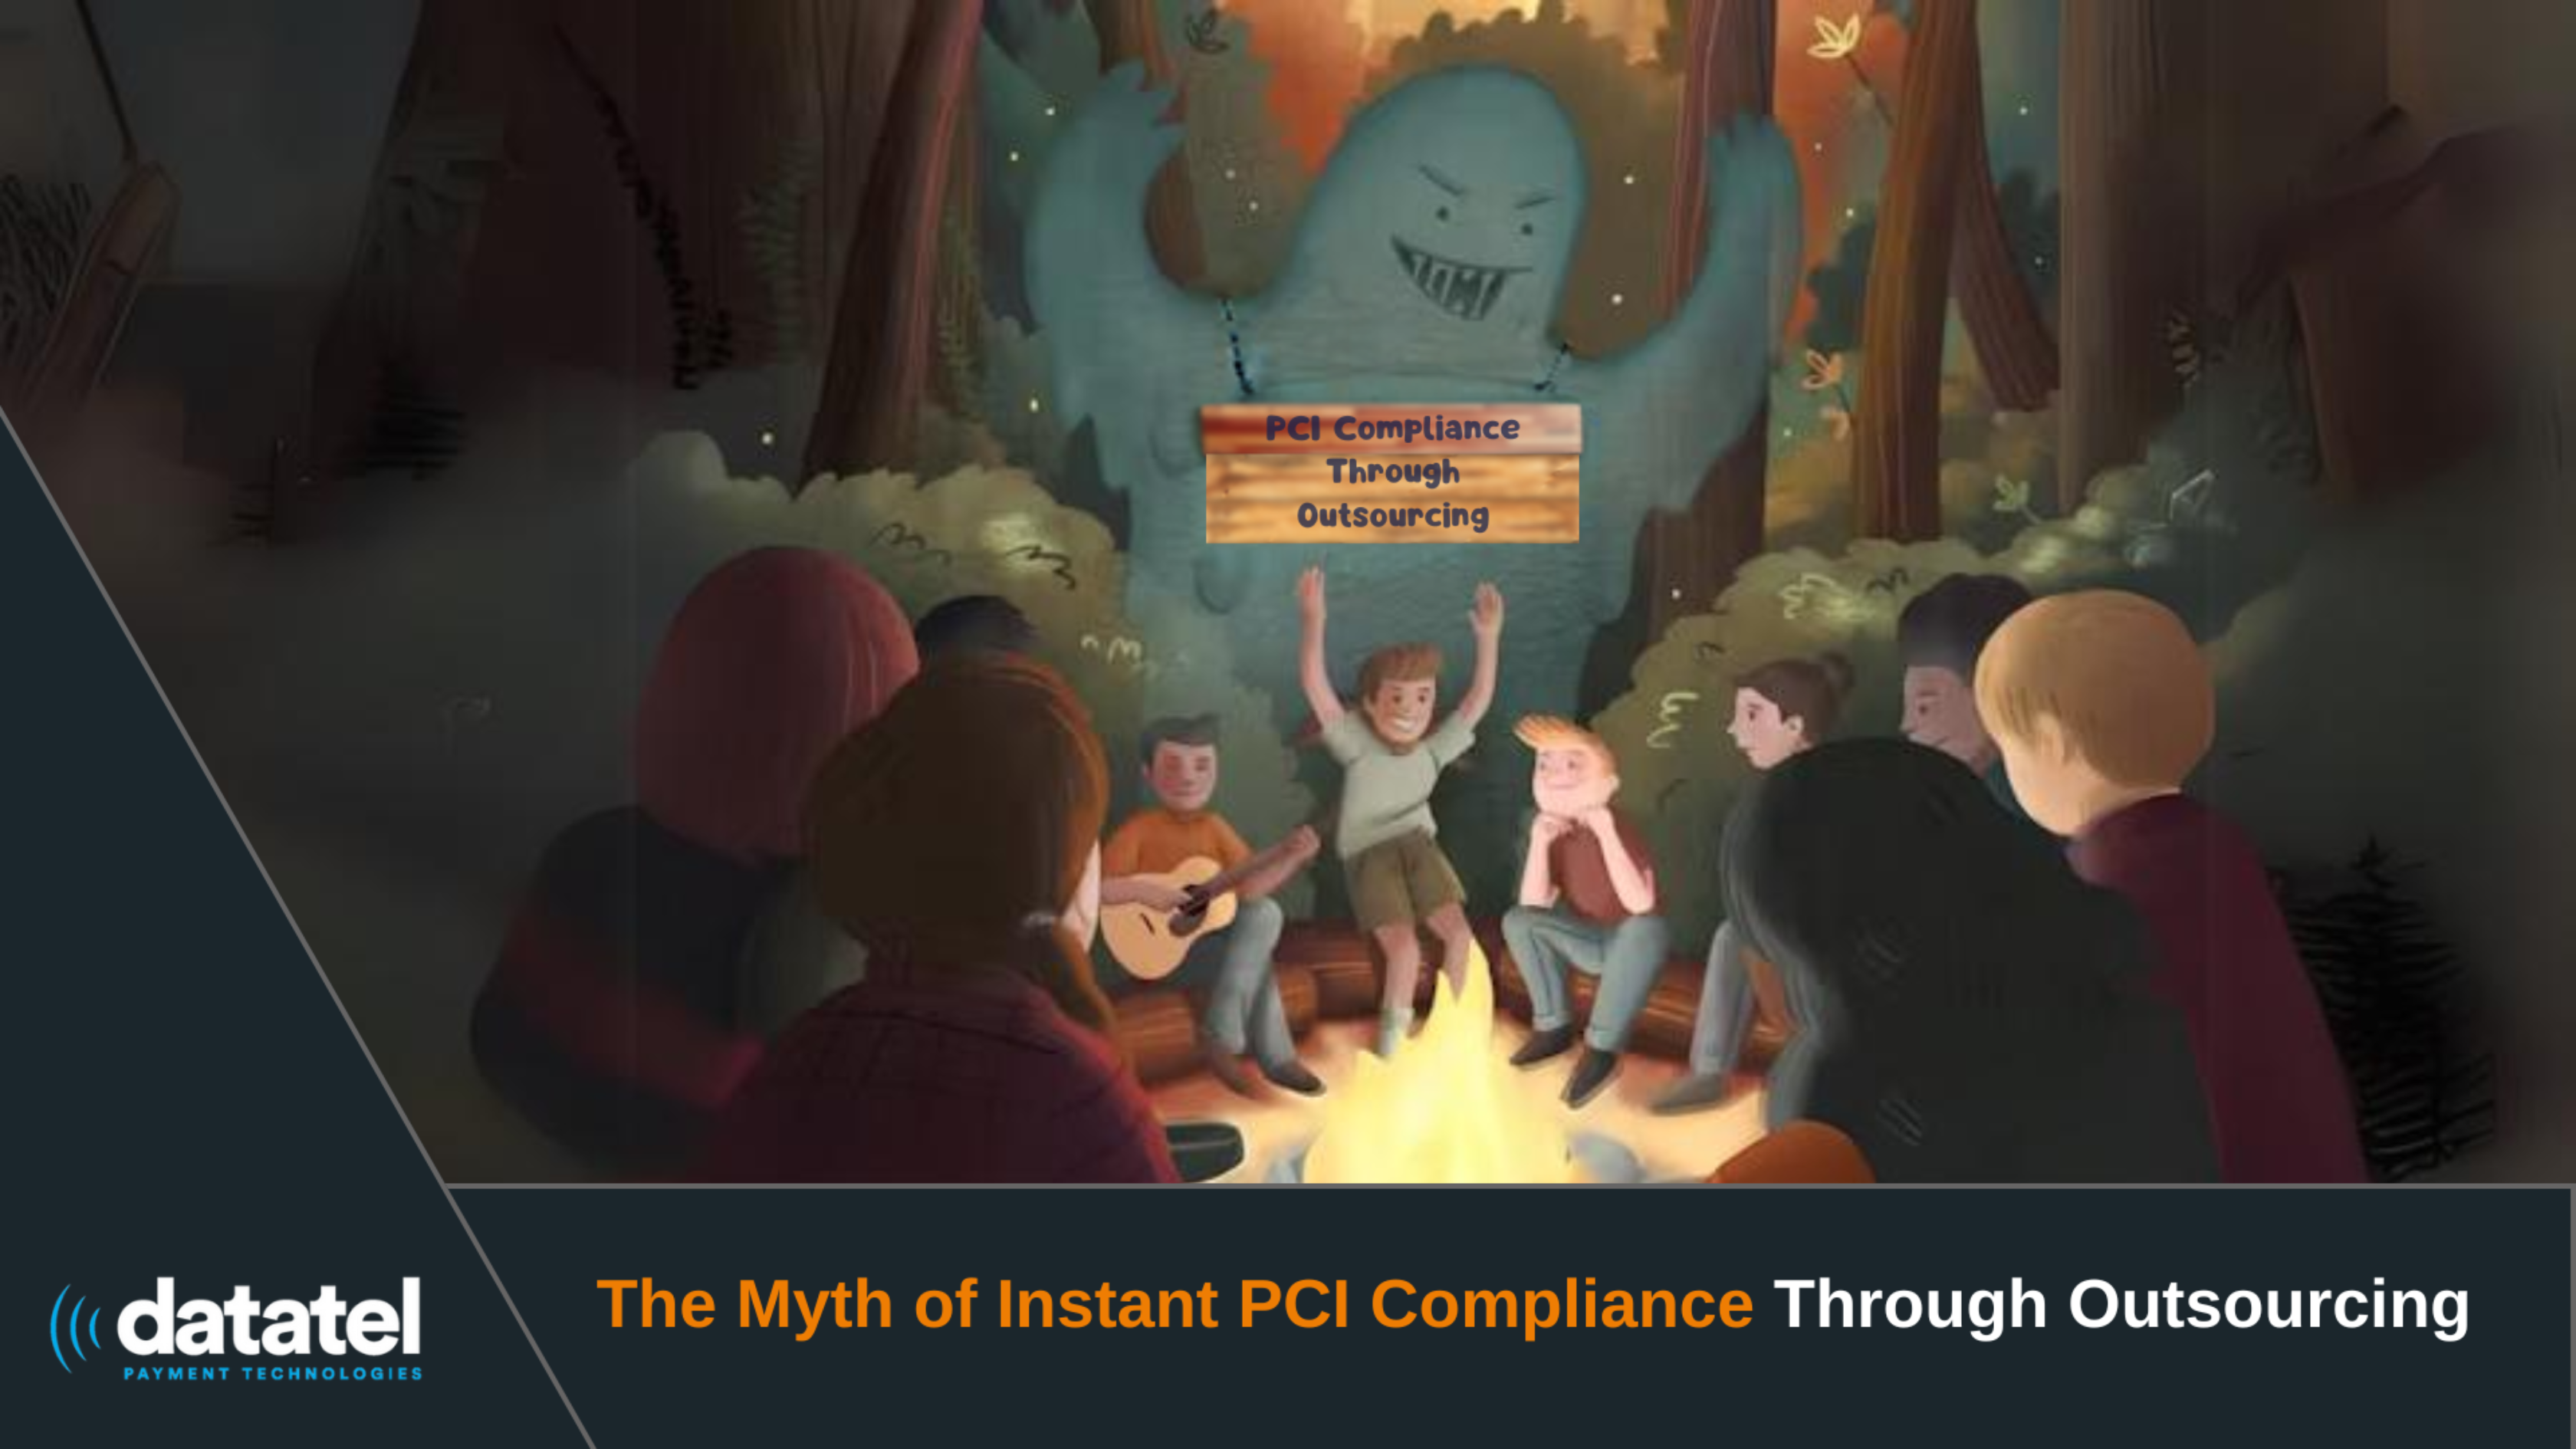 The Myth of Instant PCI Compliance Through Outsourcing